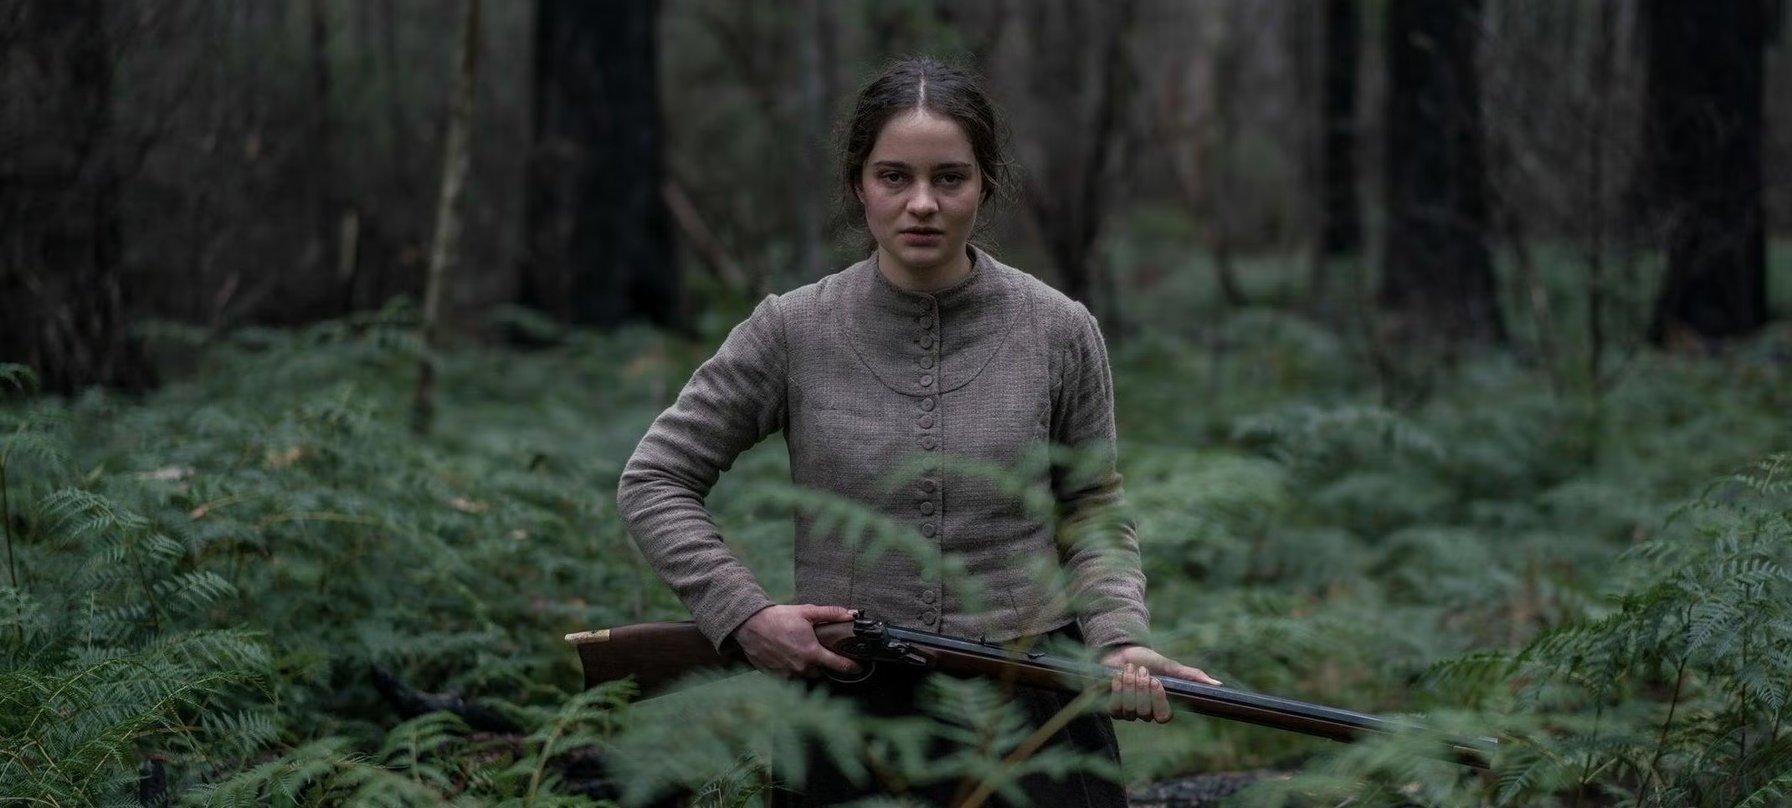 A still picture from the film The Nightingale.